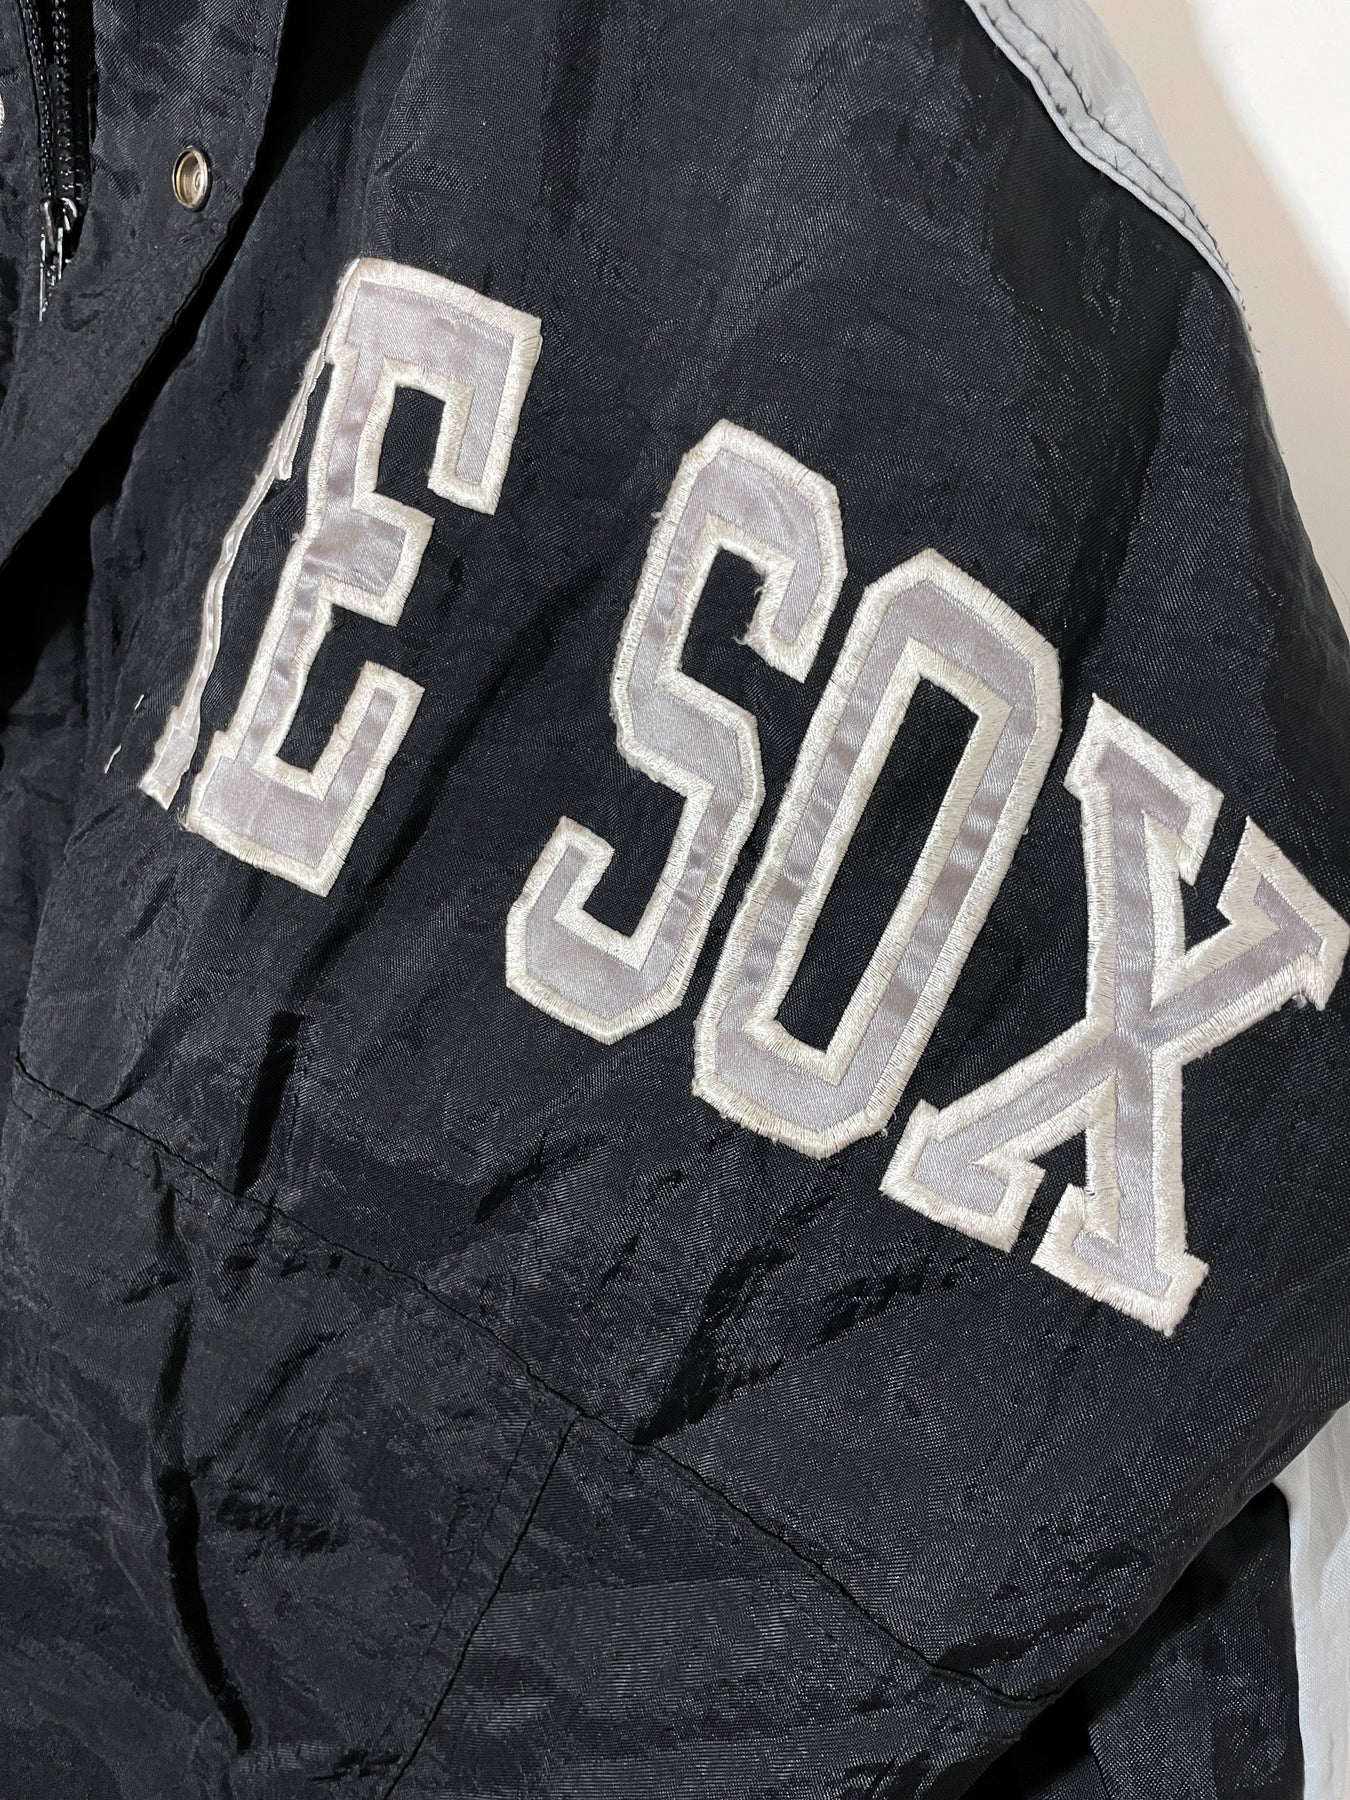 White Sox Jersey Size M from 1990s by Starter